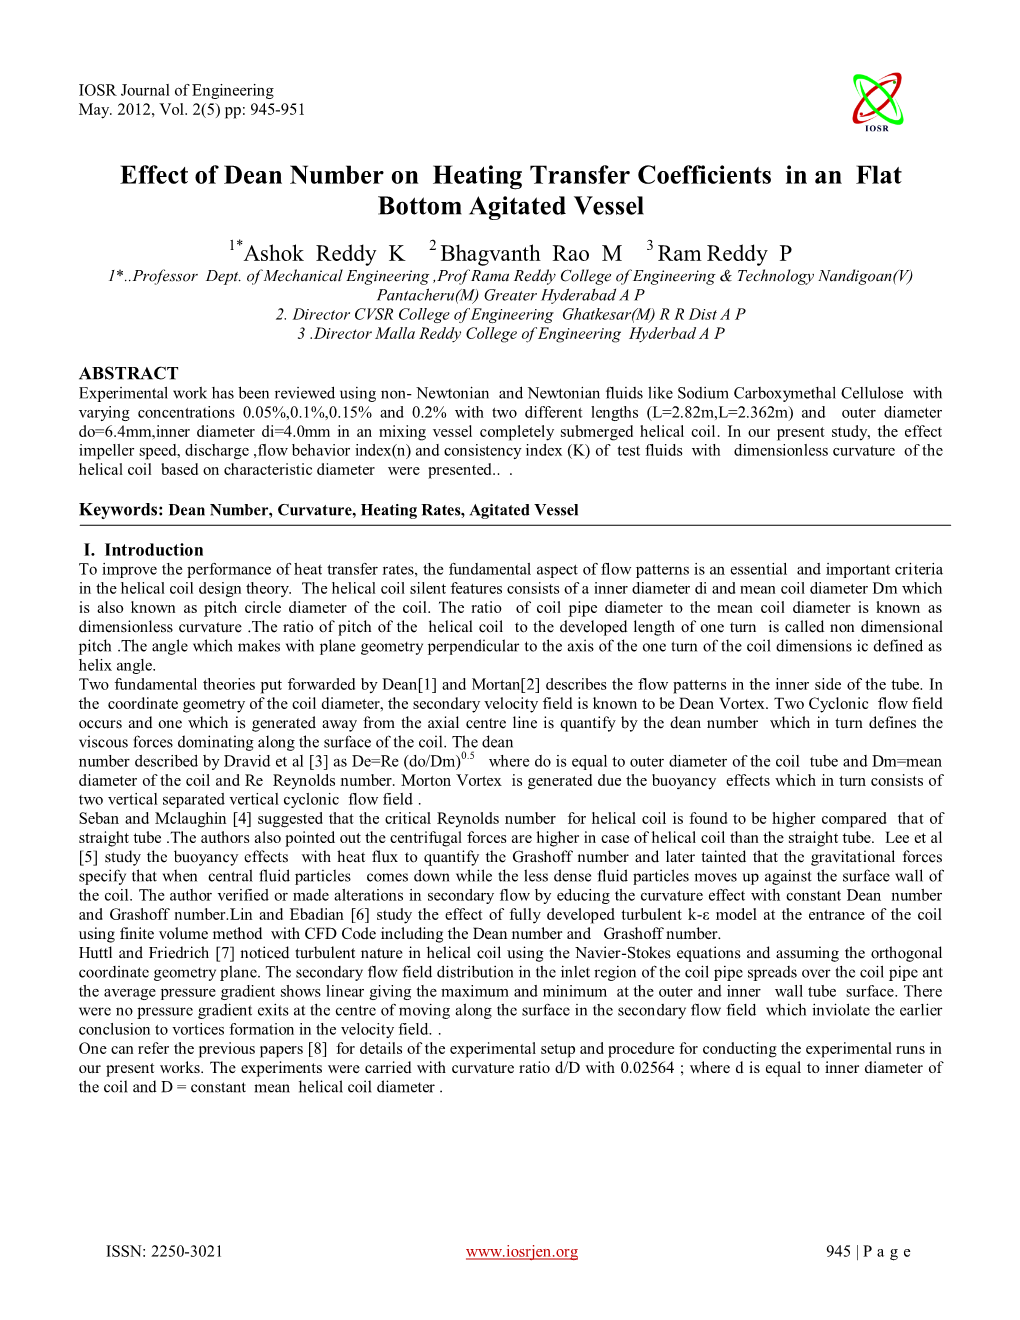 Effect of Dean Number on Heating Transfer Coefficients in an Flat Bottom Agitated Vessel